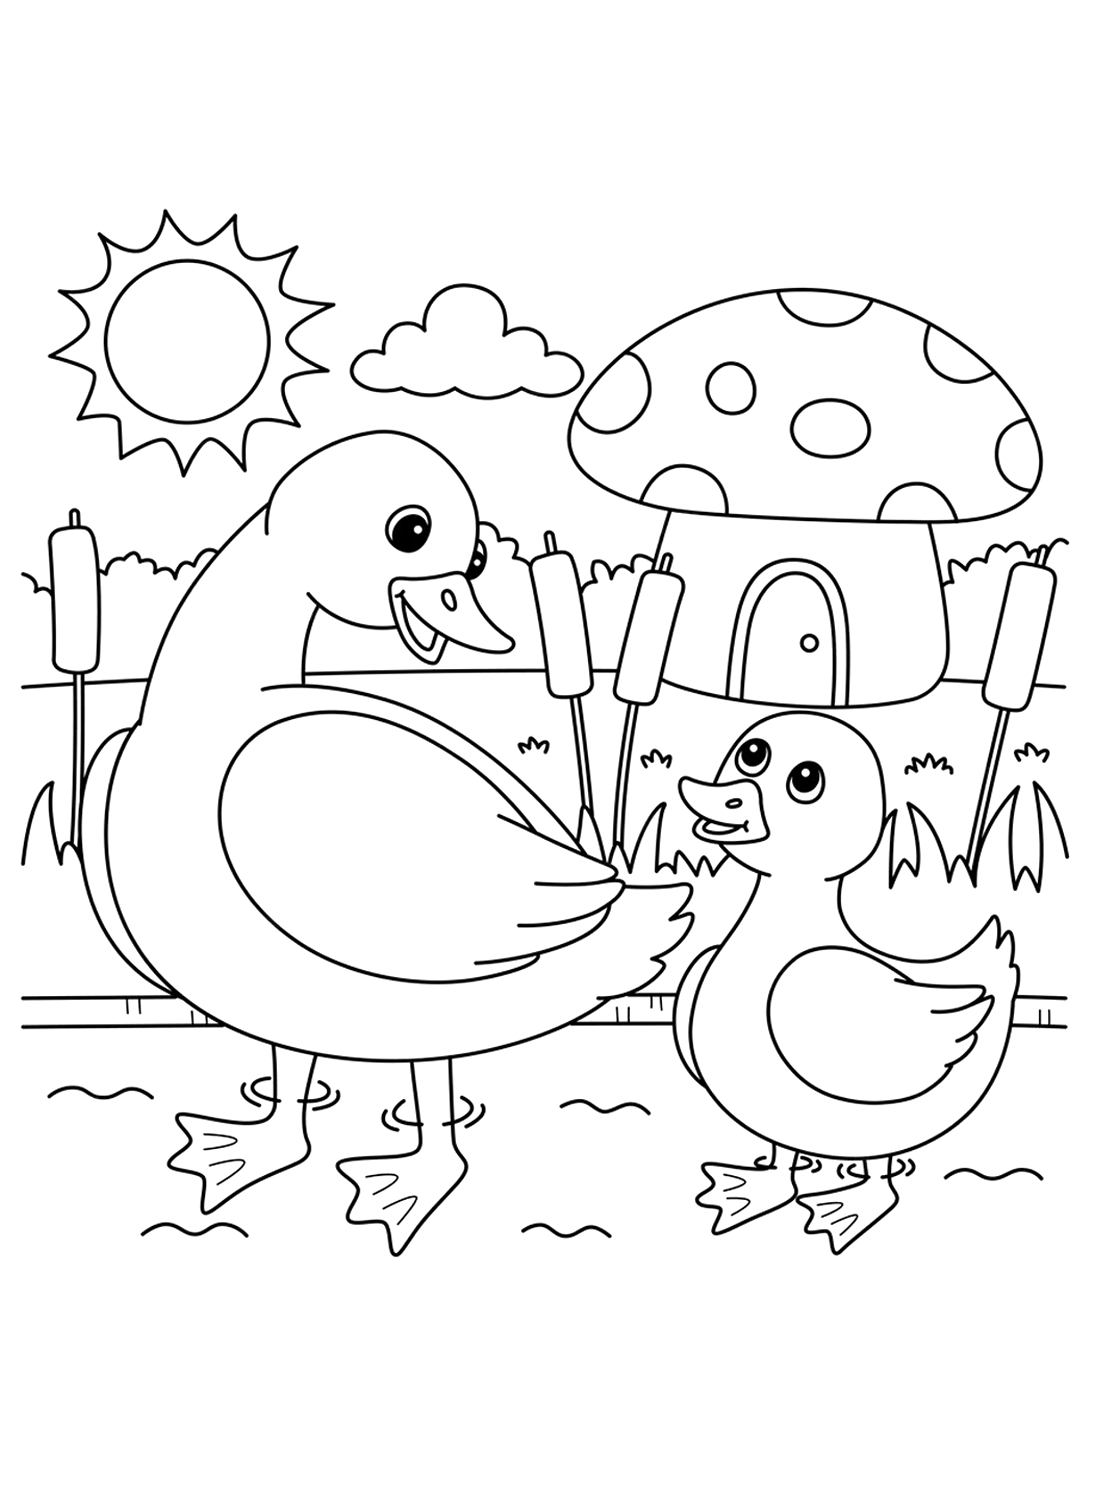 Duck and duckling Coloring Pages